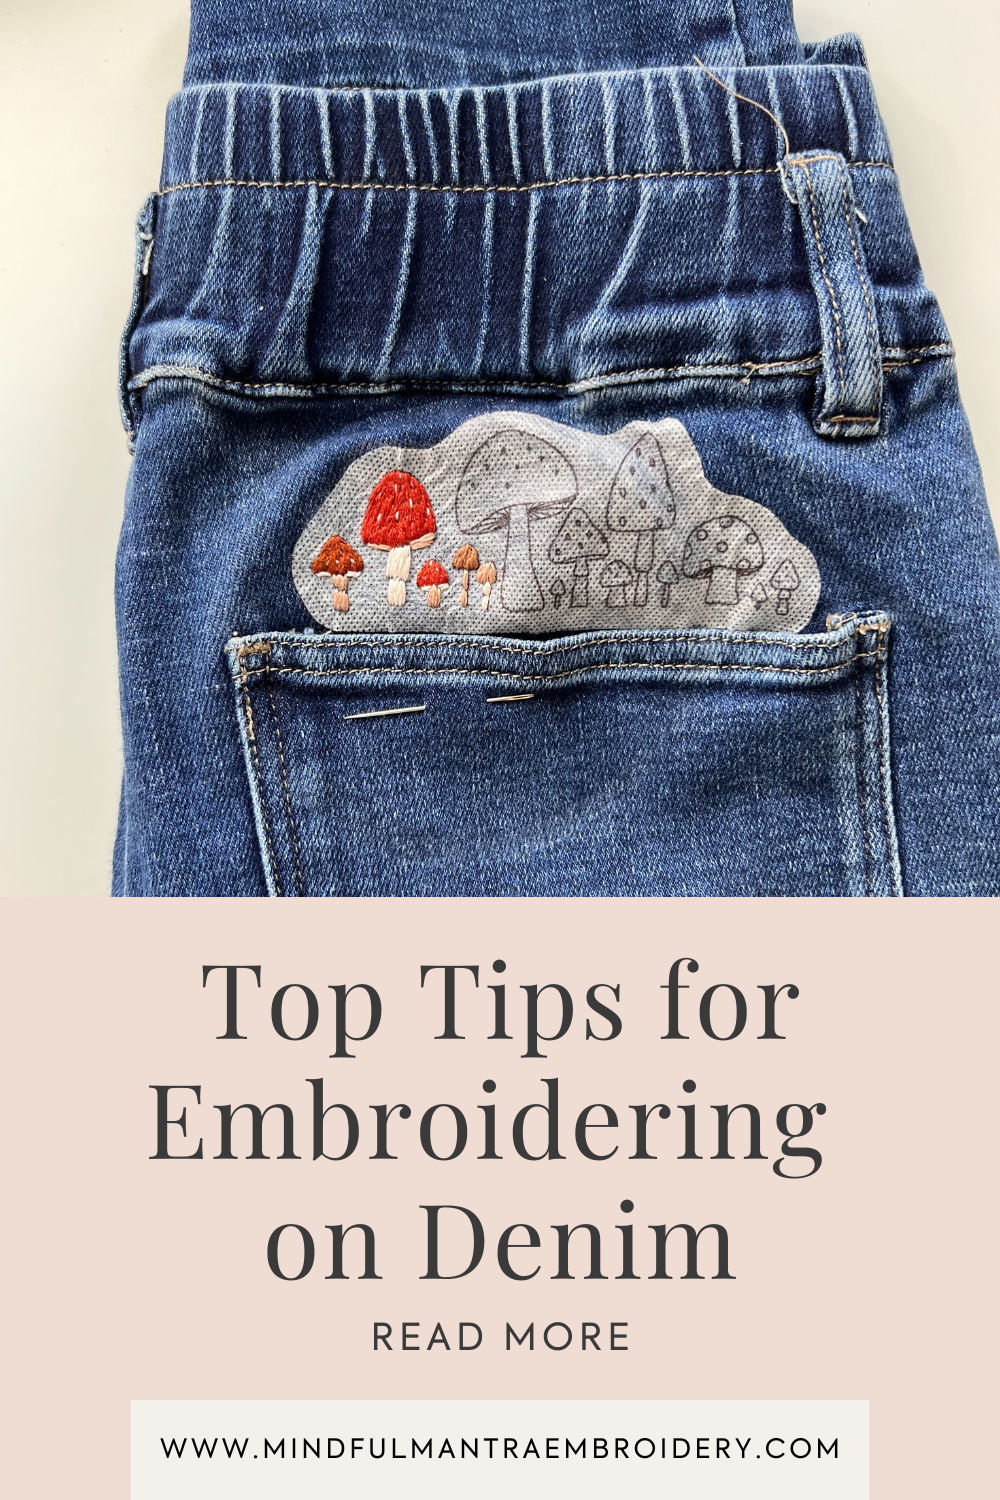 Top Tips for Embroidering on Denim